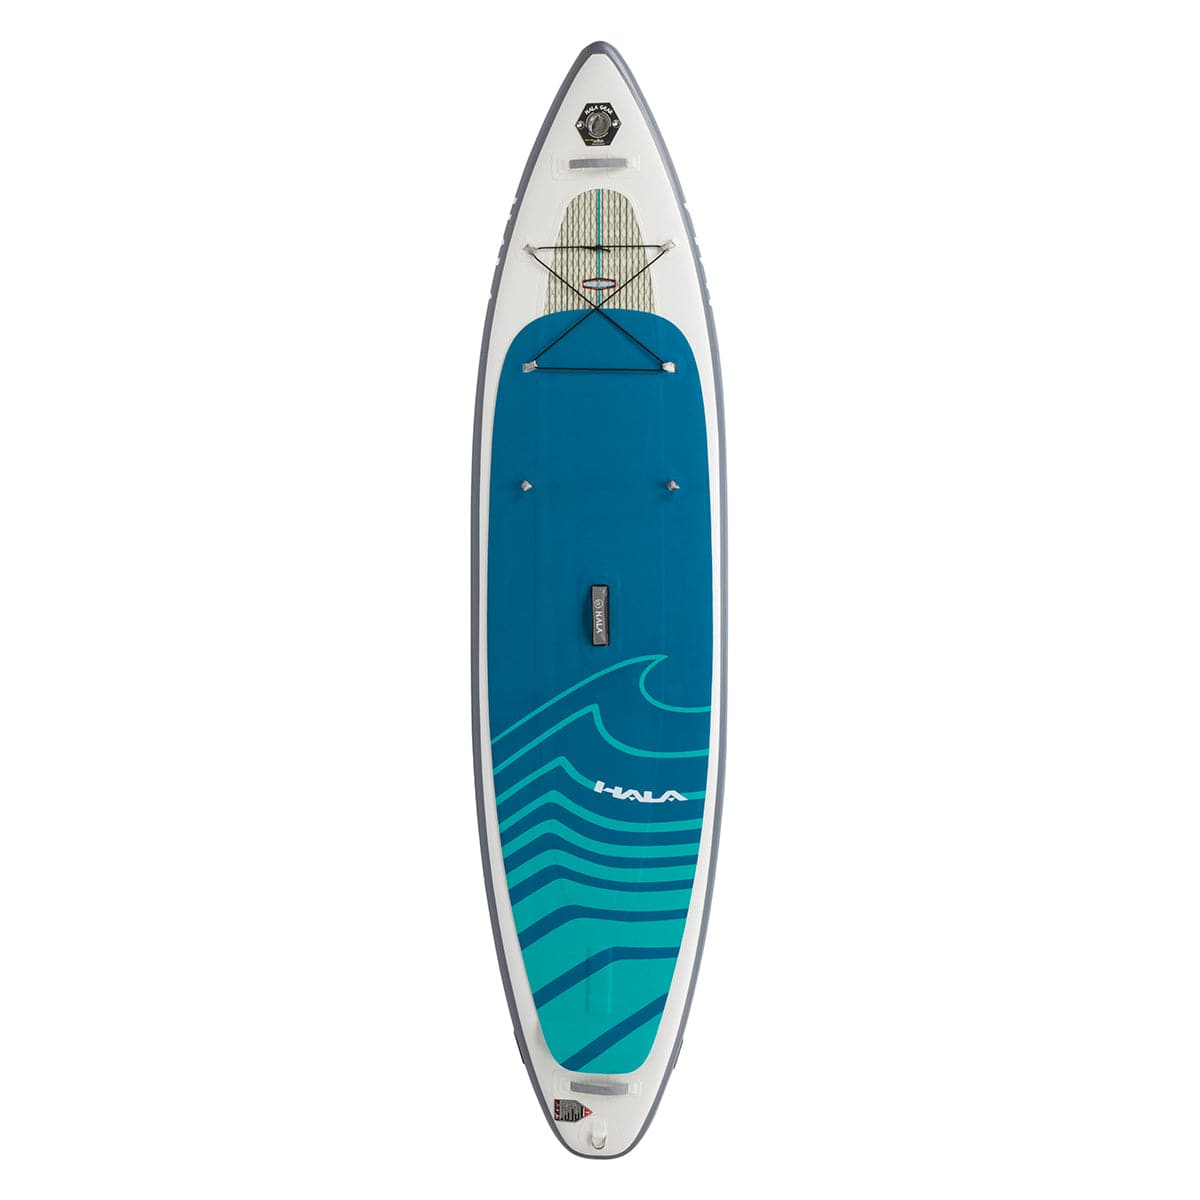 Featuring the Carbon Playa 10'11 Inflatable SUP inflatable sup manufactured by Hala shown here from one angle.